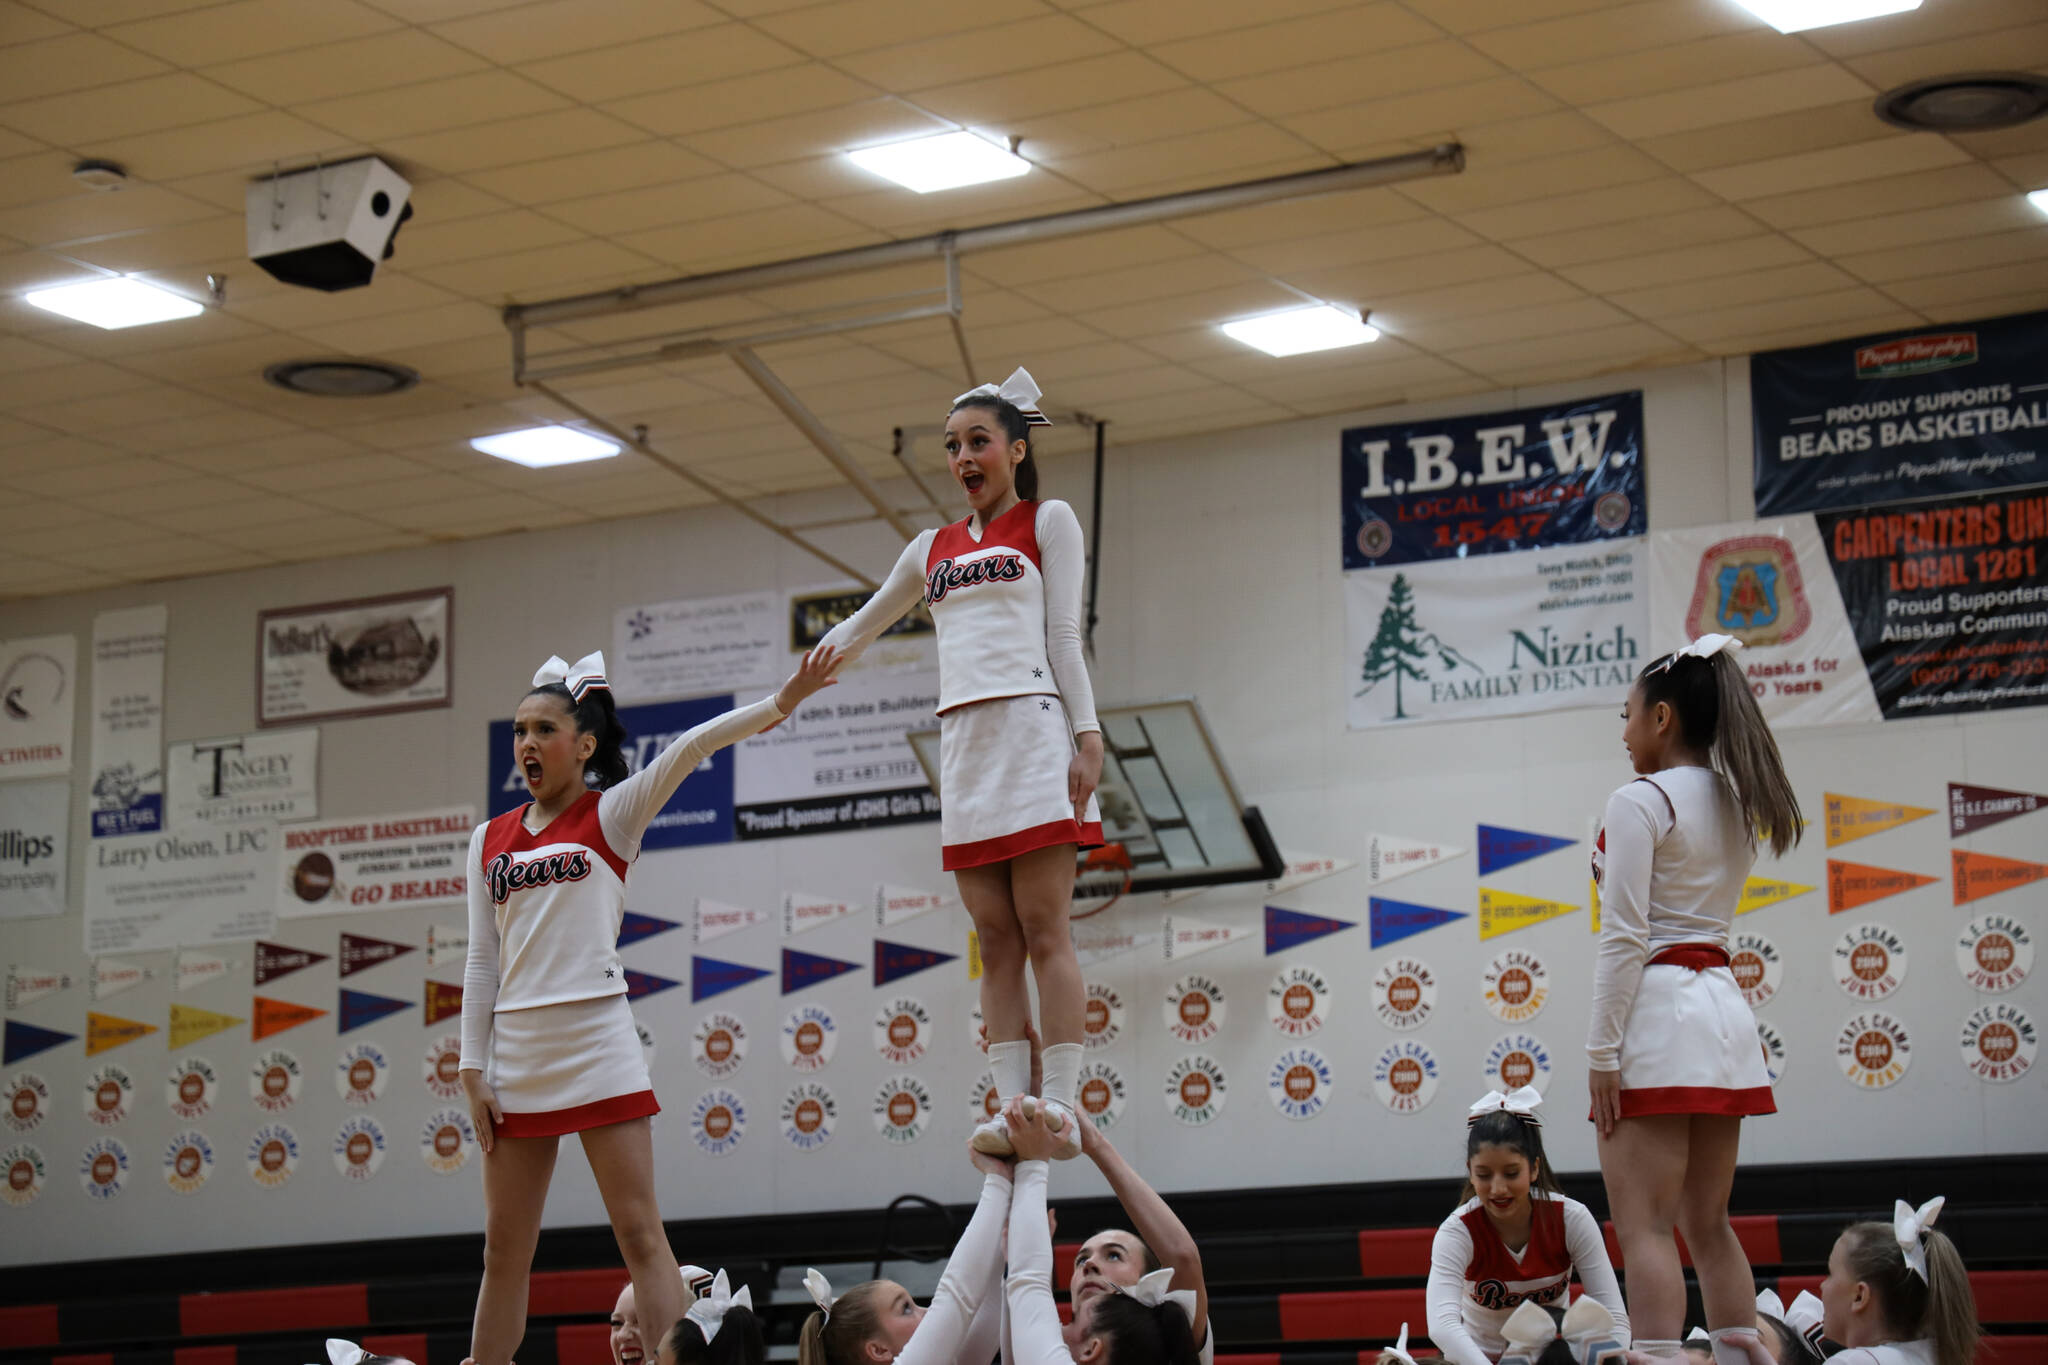 JDHS cheerleaders balance in the air with ease during the annual Region V 2A/4A dance adjudication competition hosted at Juneau-Douglas High School:Yadaa.at Kalé Saturday afternoon. (Clarise Larson / Juneau Empire)